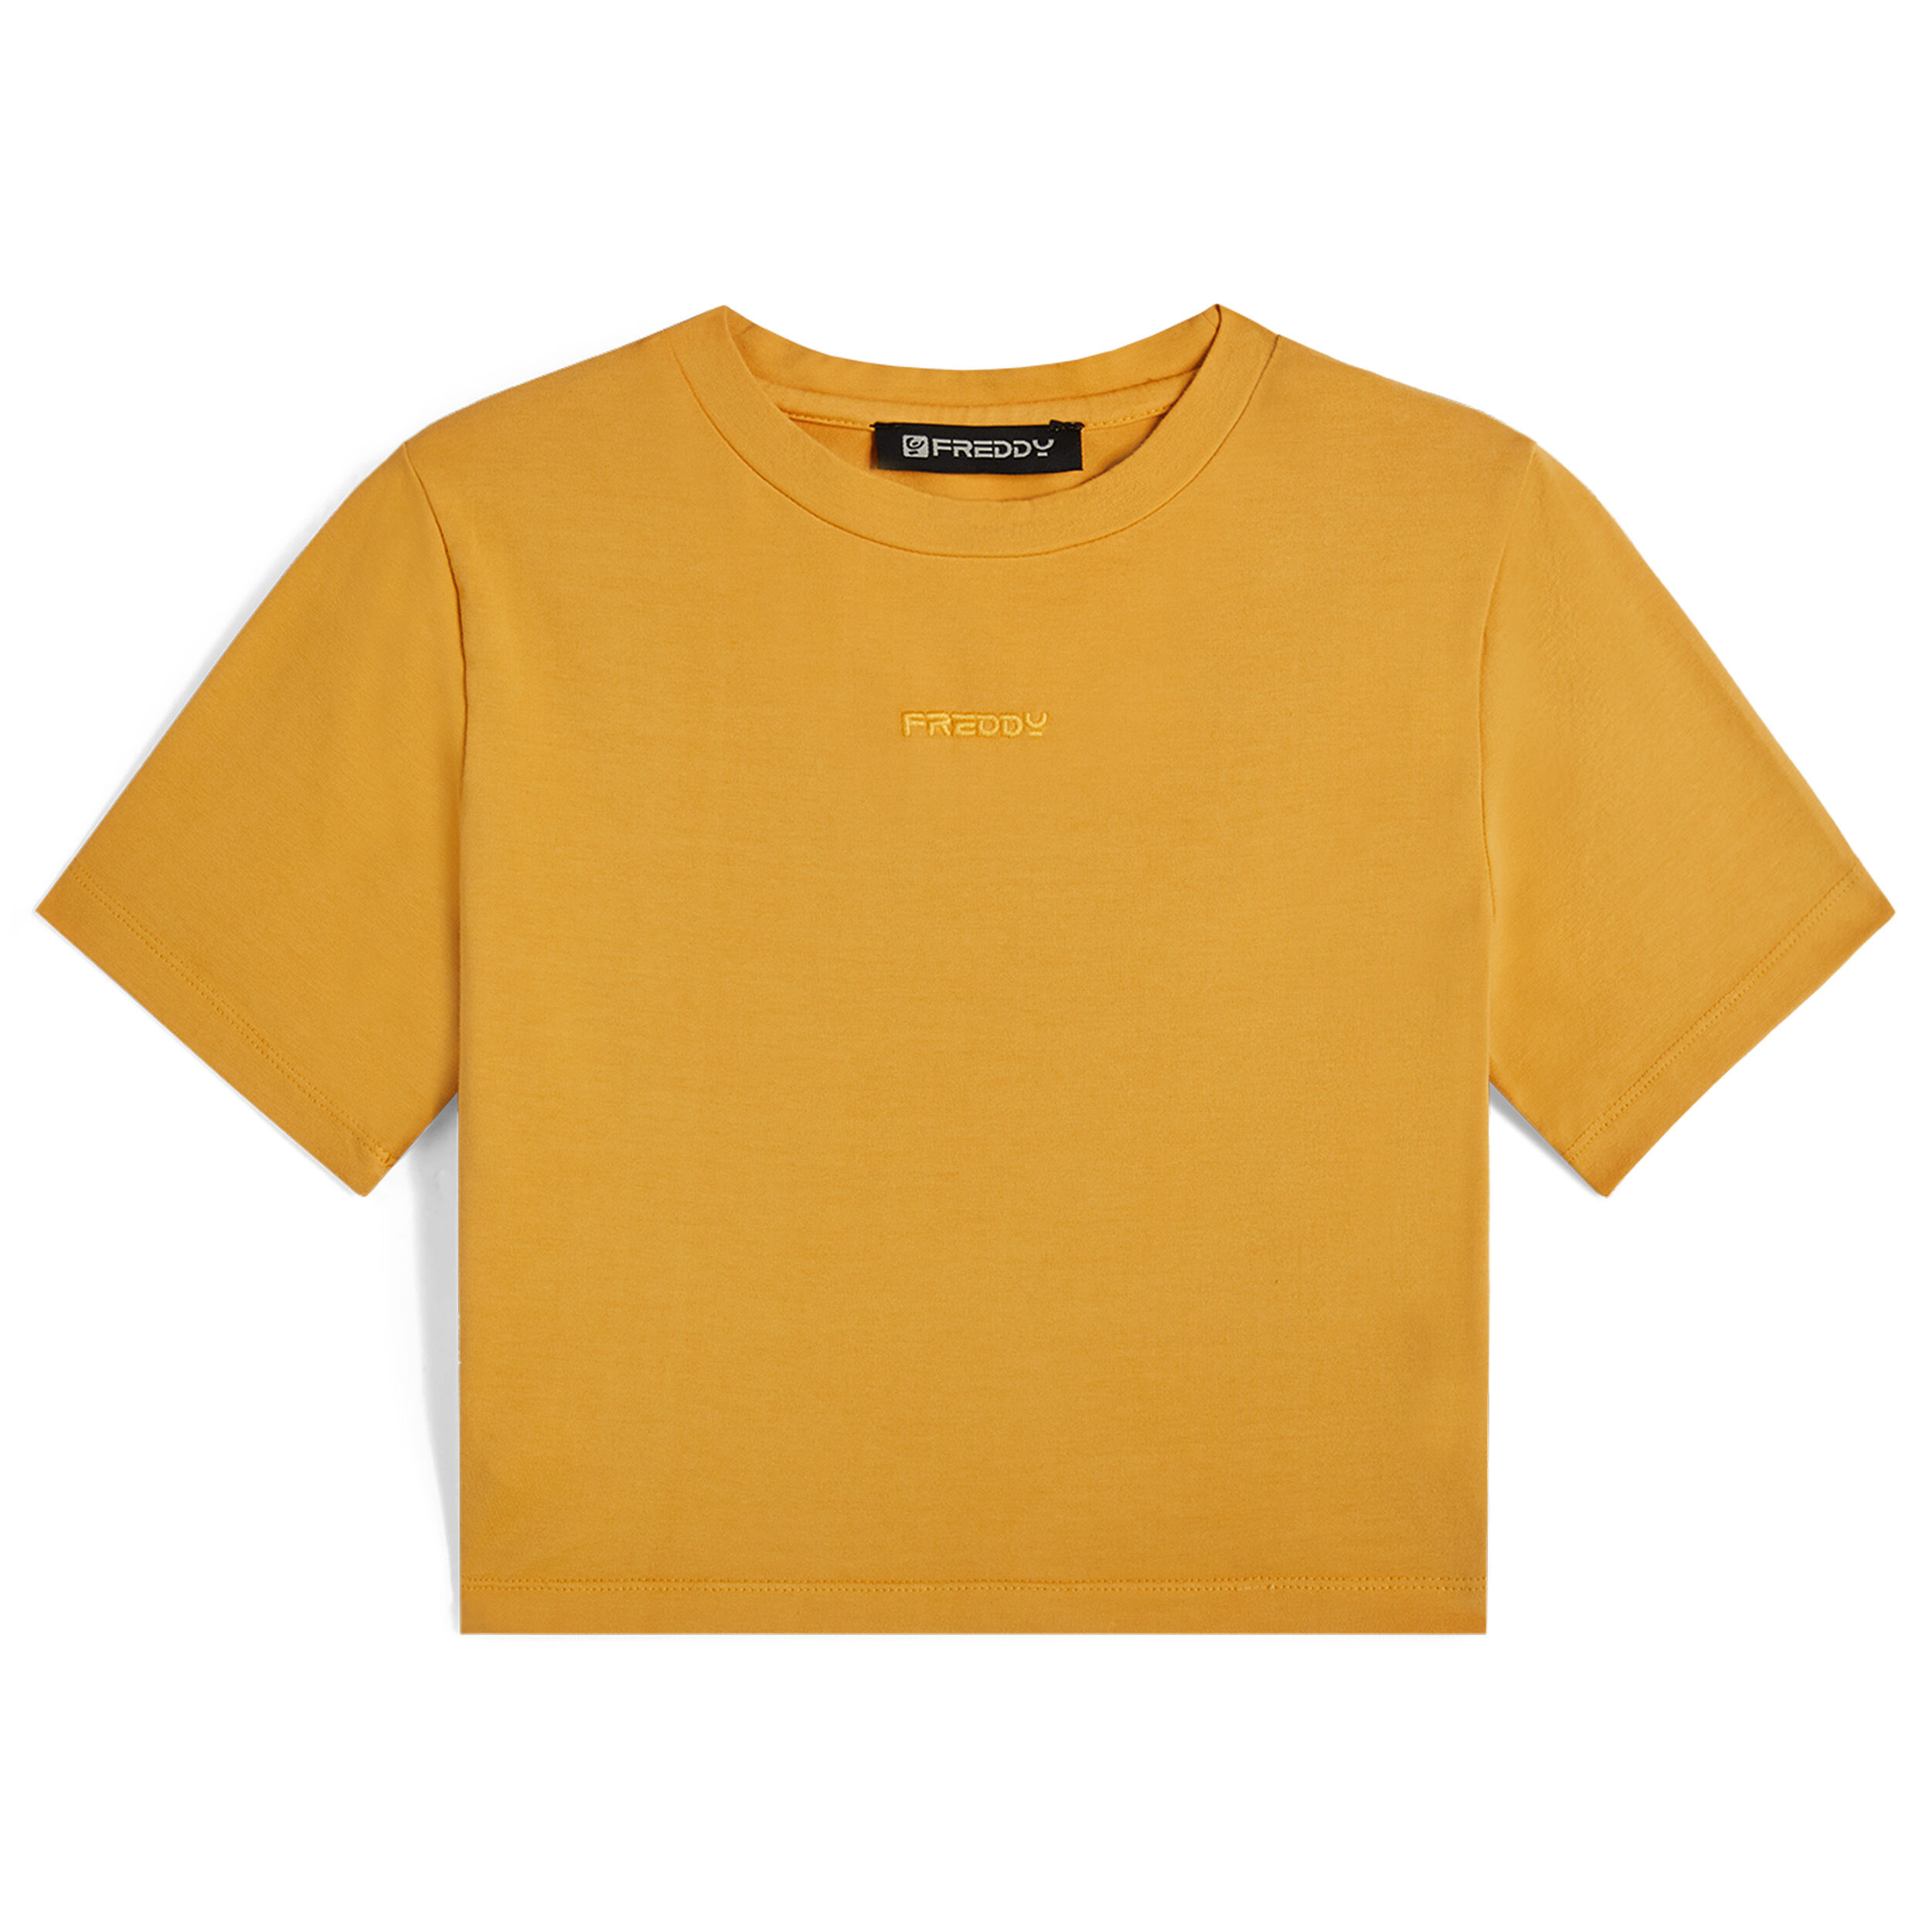 Freddy T-shirt slim fit corta in tessuto jersey tinto capo Golden Apricot Direct Dyed Donna Medium